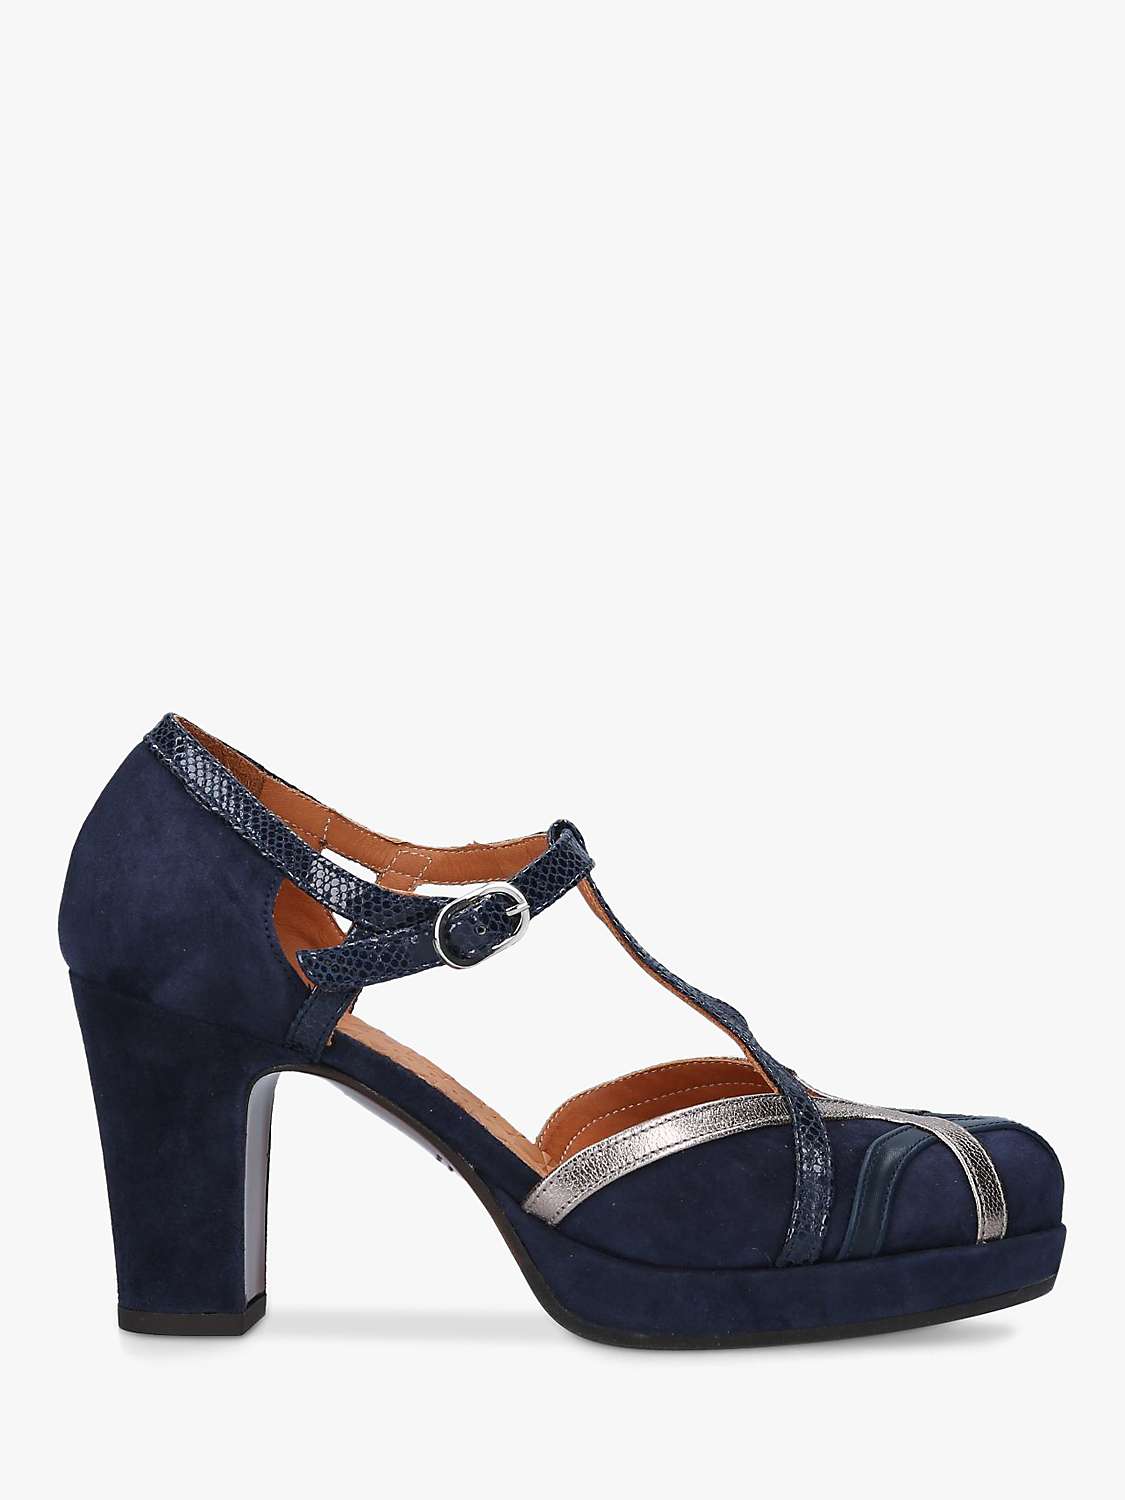 Buy Chie Mihara JU-Korea39 Suede Court Shoes, Navy Online at johnlewis.com